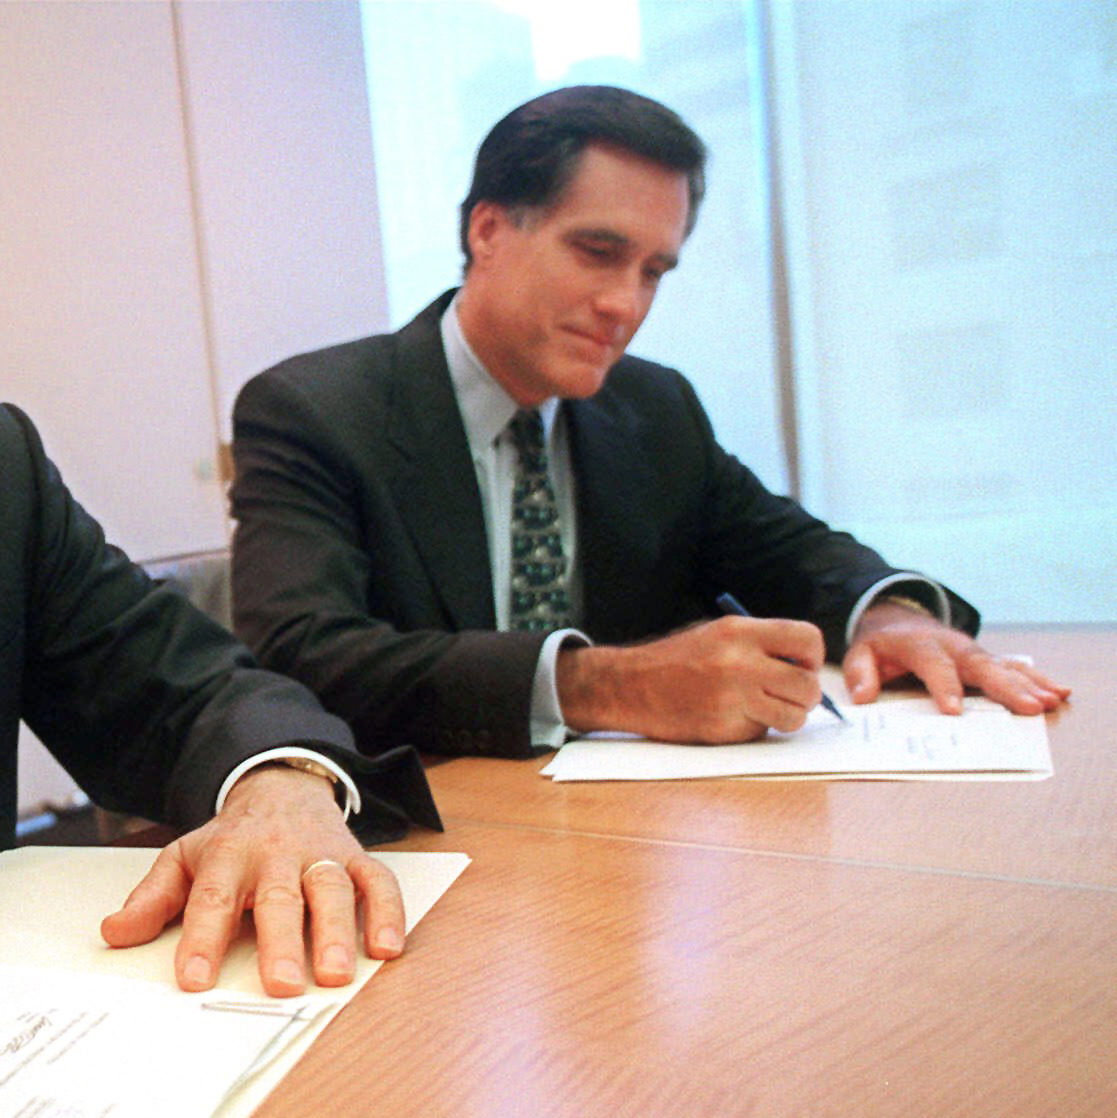 In this Sept. 25, 1998 file photo, provided by Domino's Pizza, Thomas Monaghan, founder and chairman of Domino's Pizza, Inc., left, and Mitt Romney, managing director of Bain Capital, Inc., sign an agreement for Monaghan to sell a "significant portion" of his stake in the company to Bain Capital, in New York. (AP Photo/Domino's Pizza, Scott Gries, File)